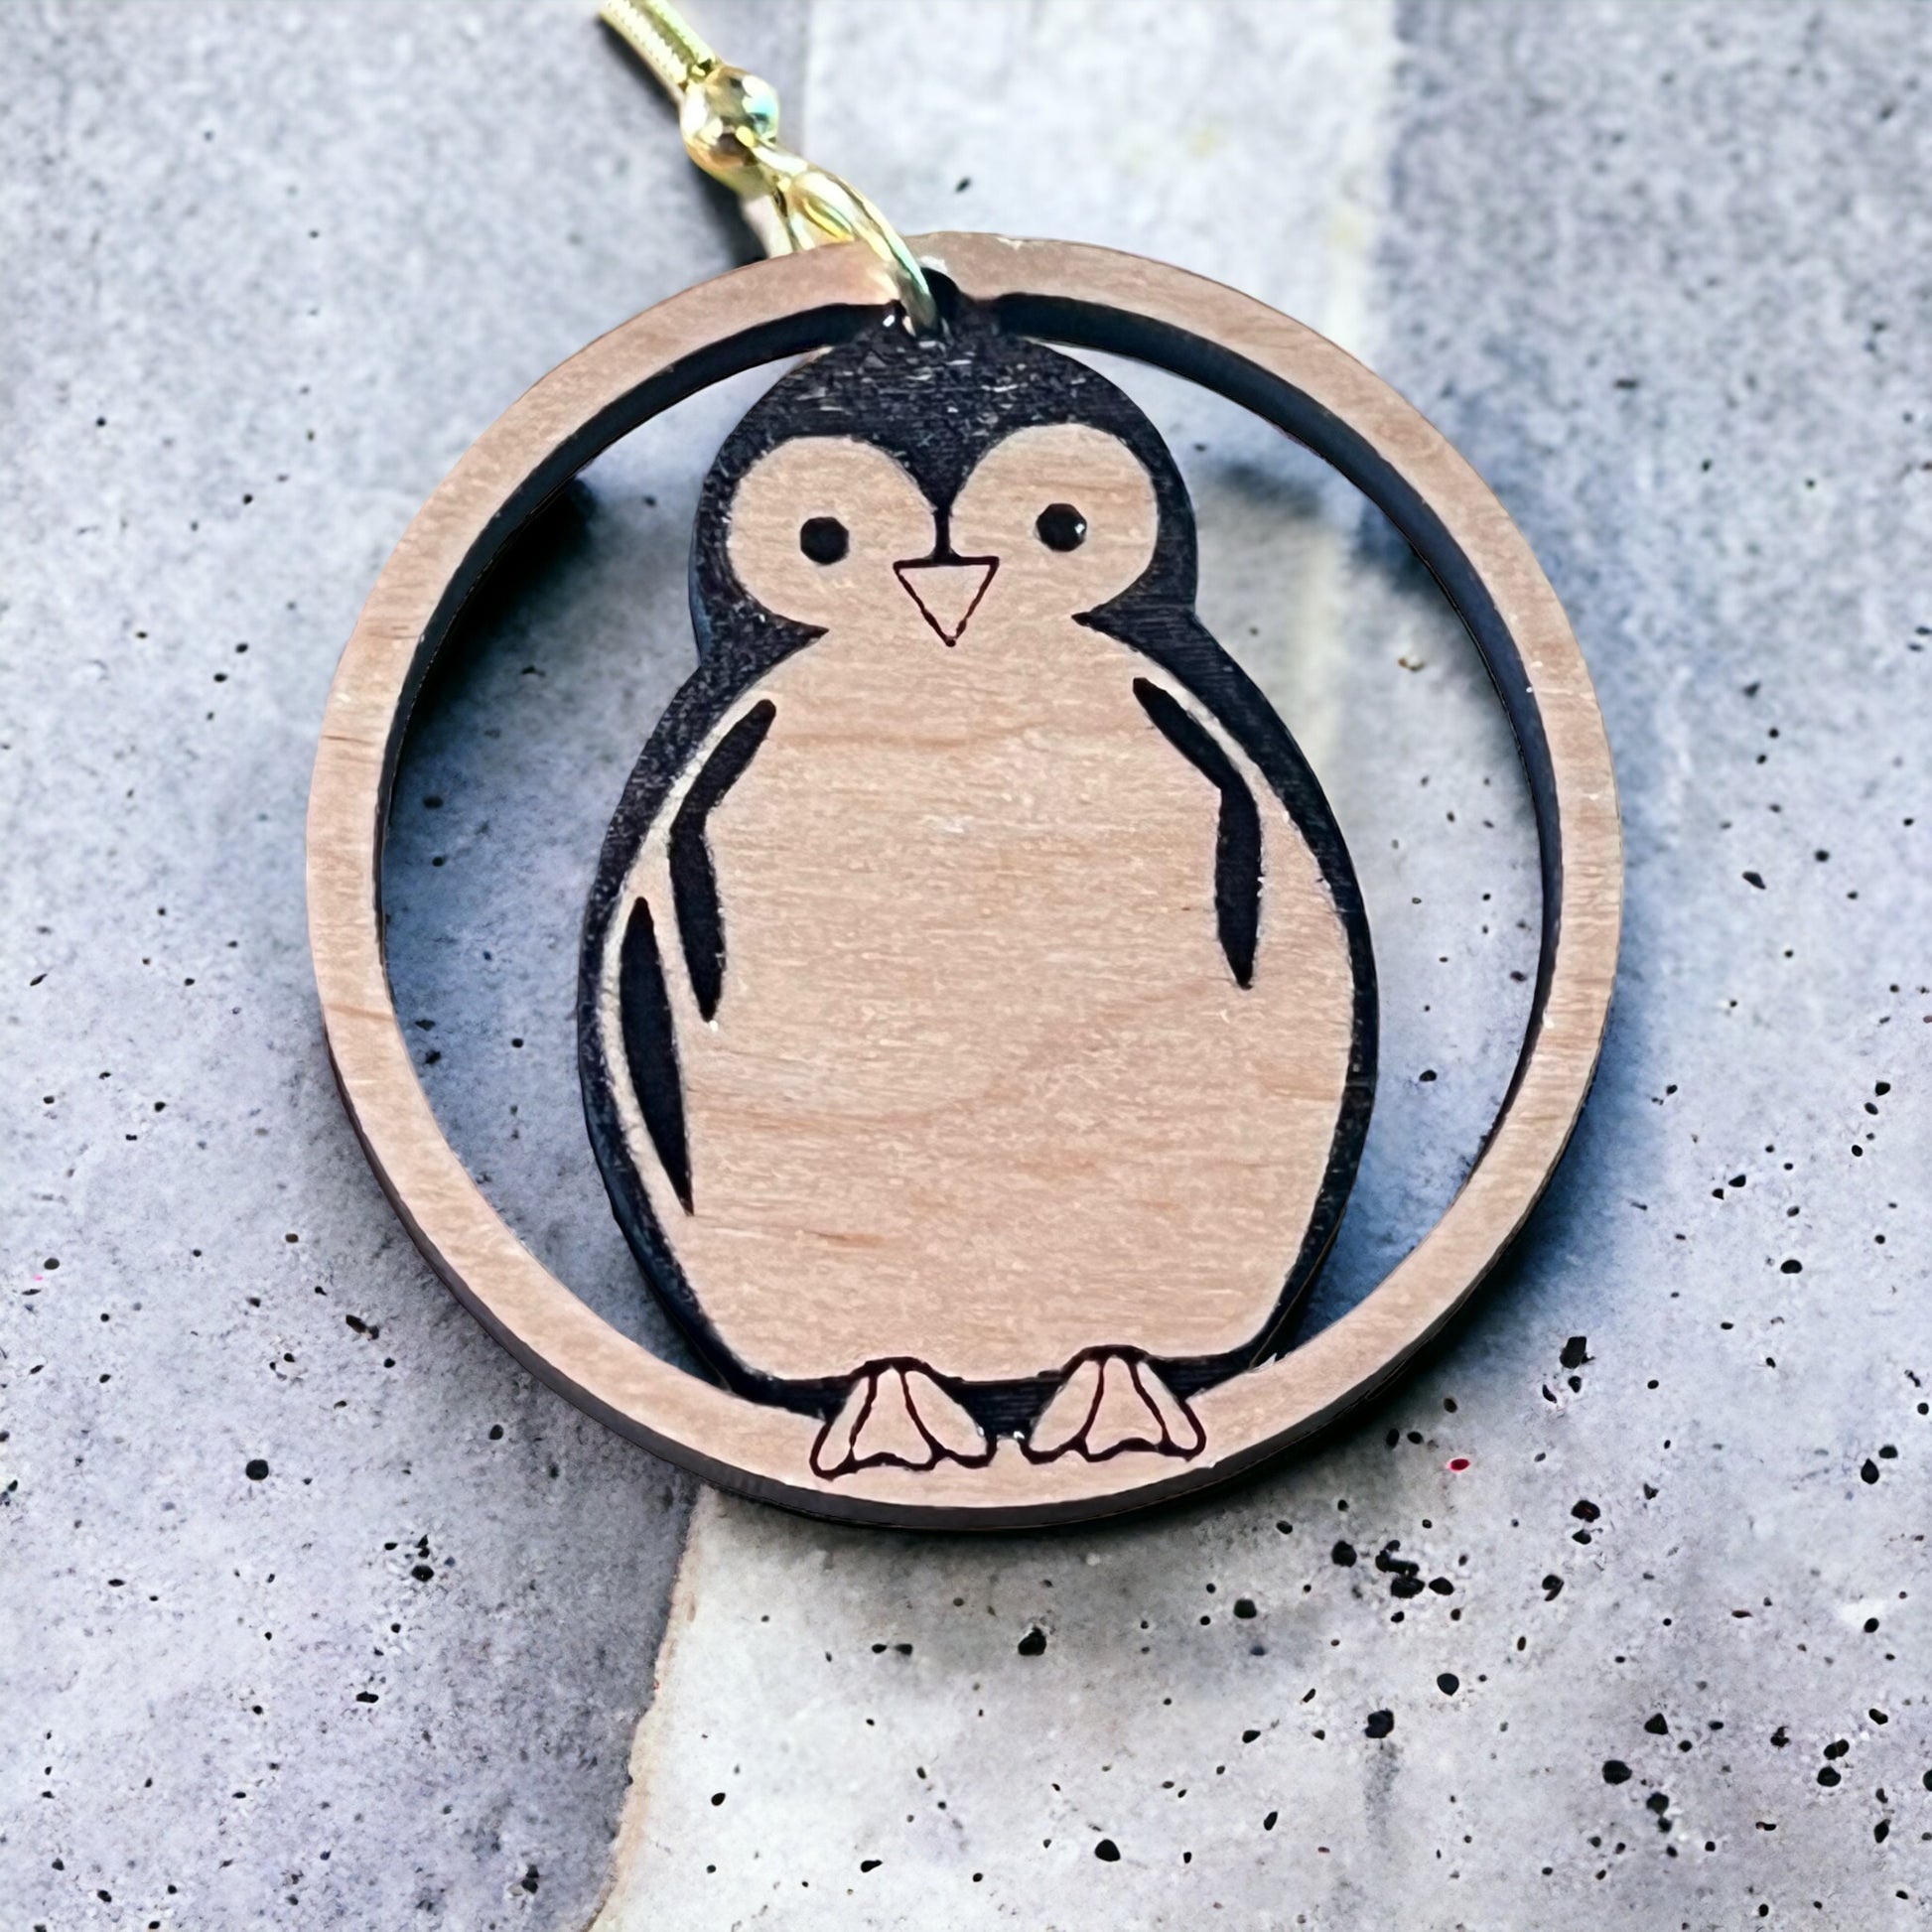 Wood Penguin Dangle Earrings - Charming & Whimsical Accessories